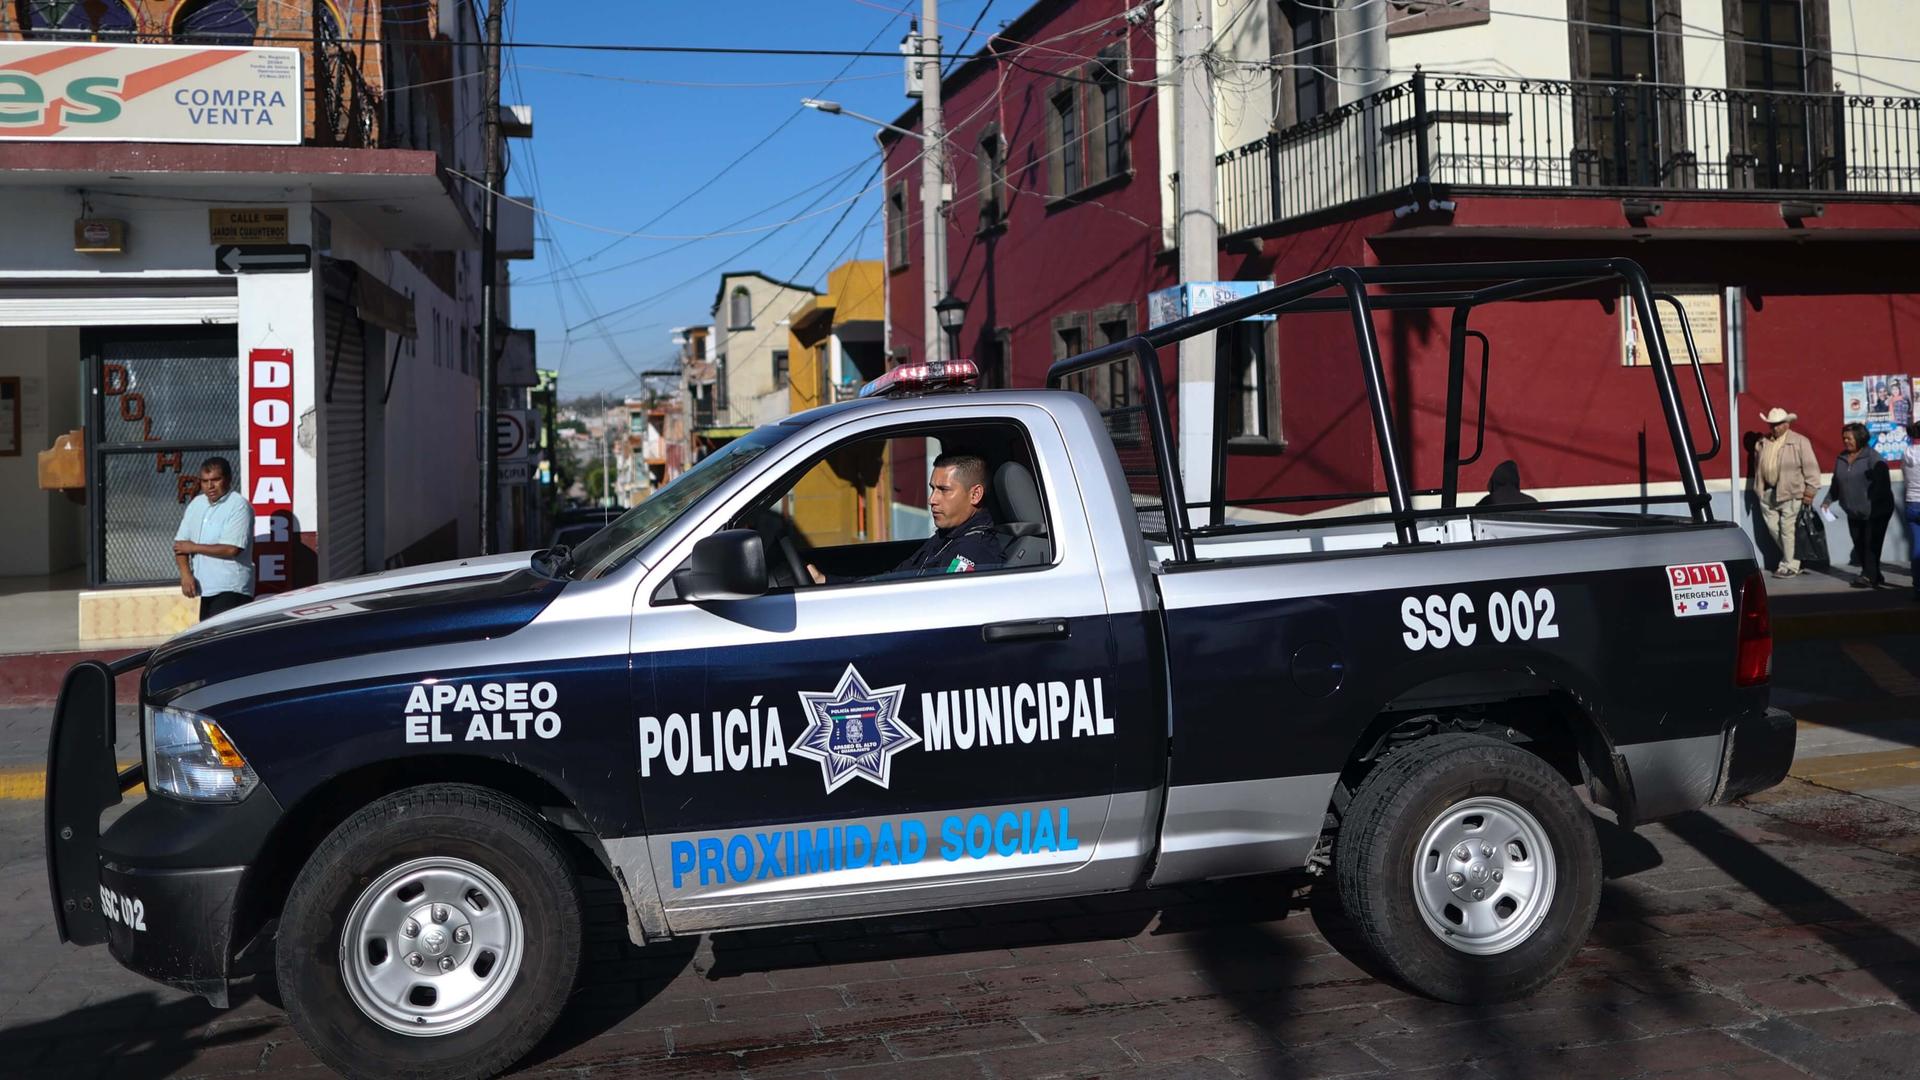 A police officer drives a large blue and white police vehicle through town